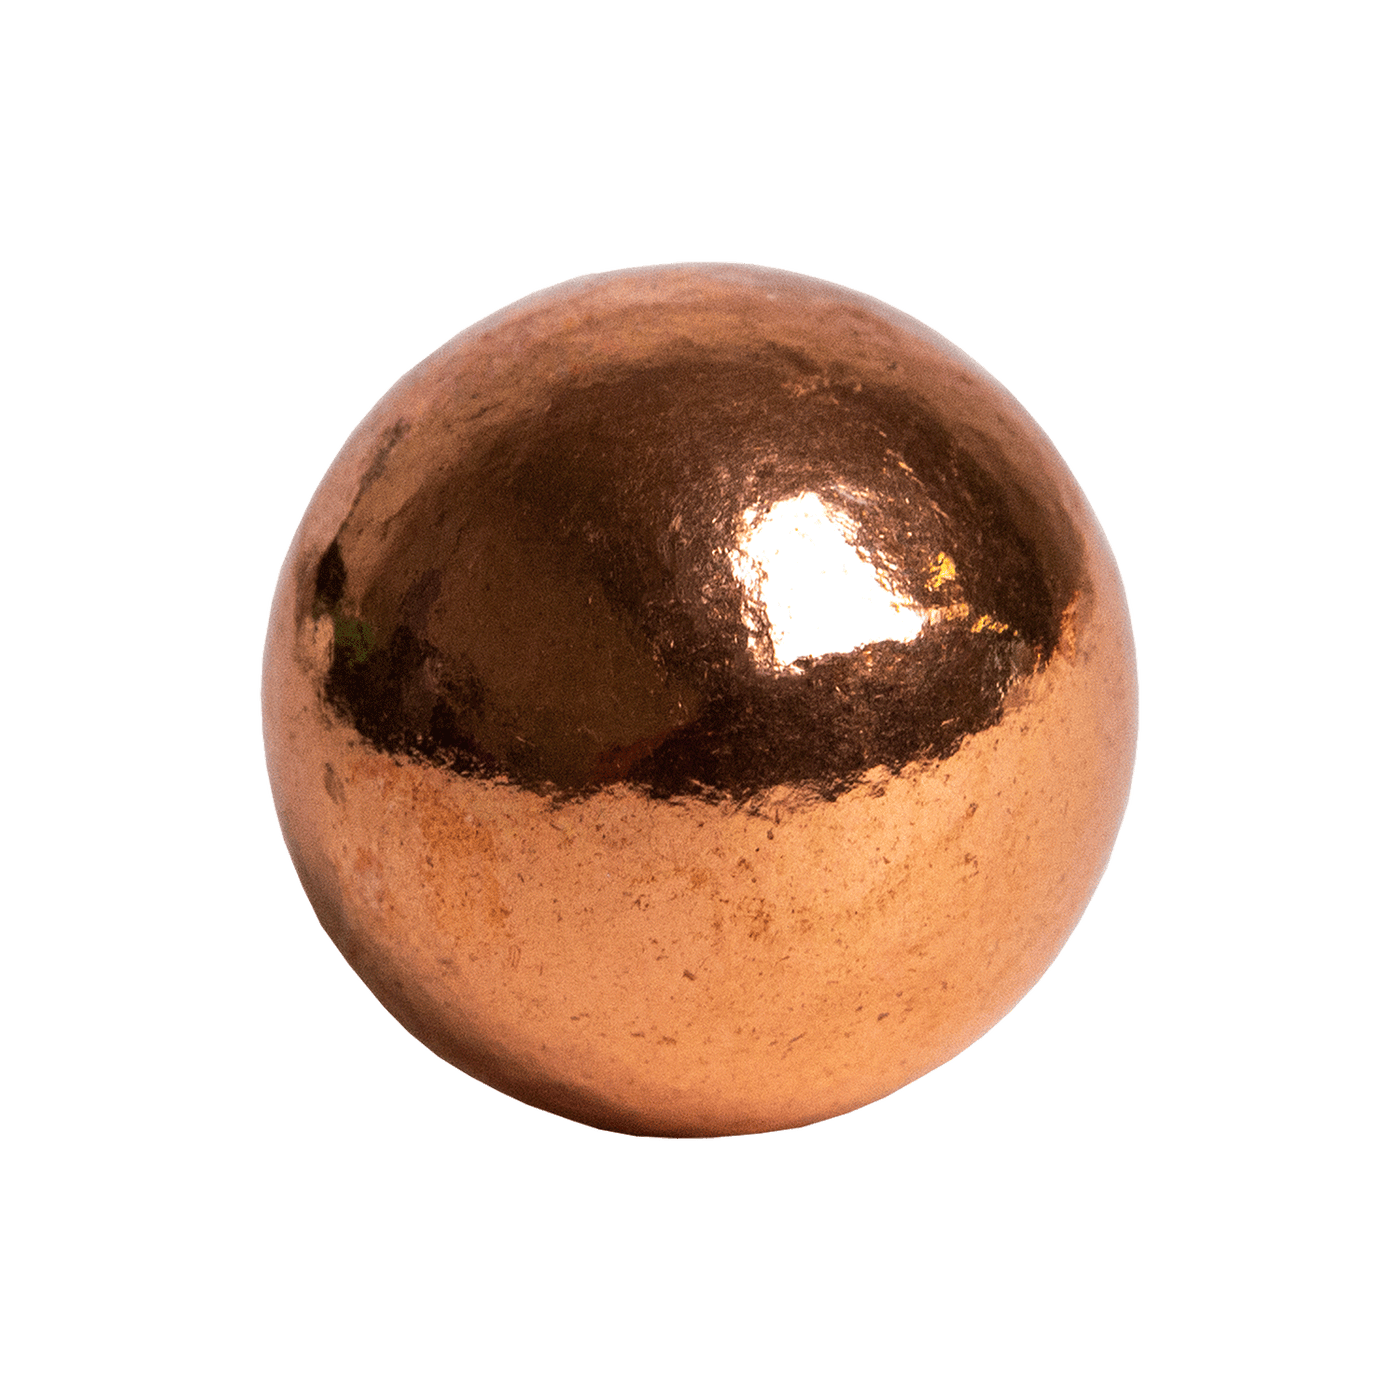 product view of genuine Copper Sphere for meditating by Energy Muse